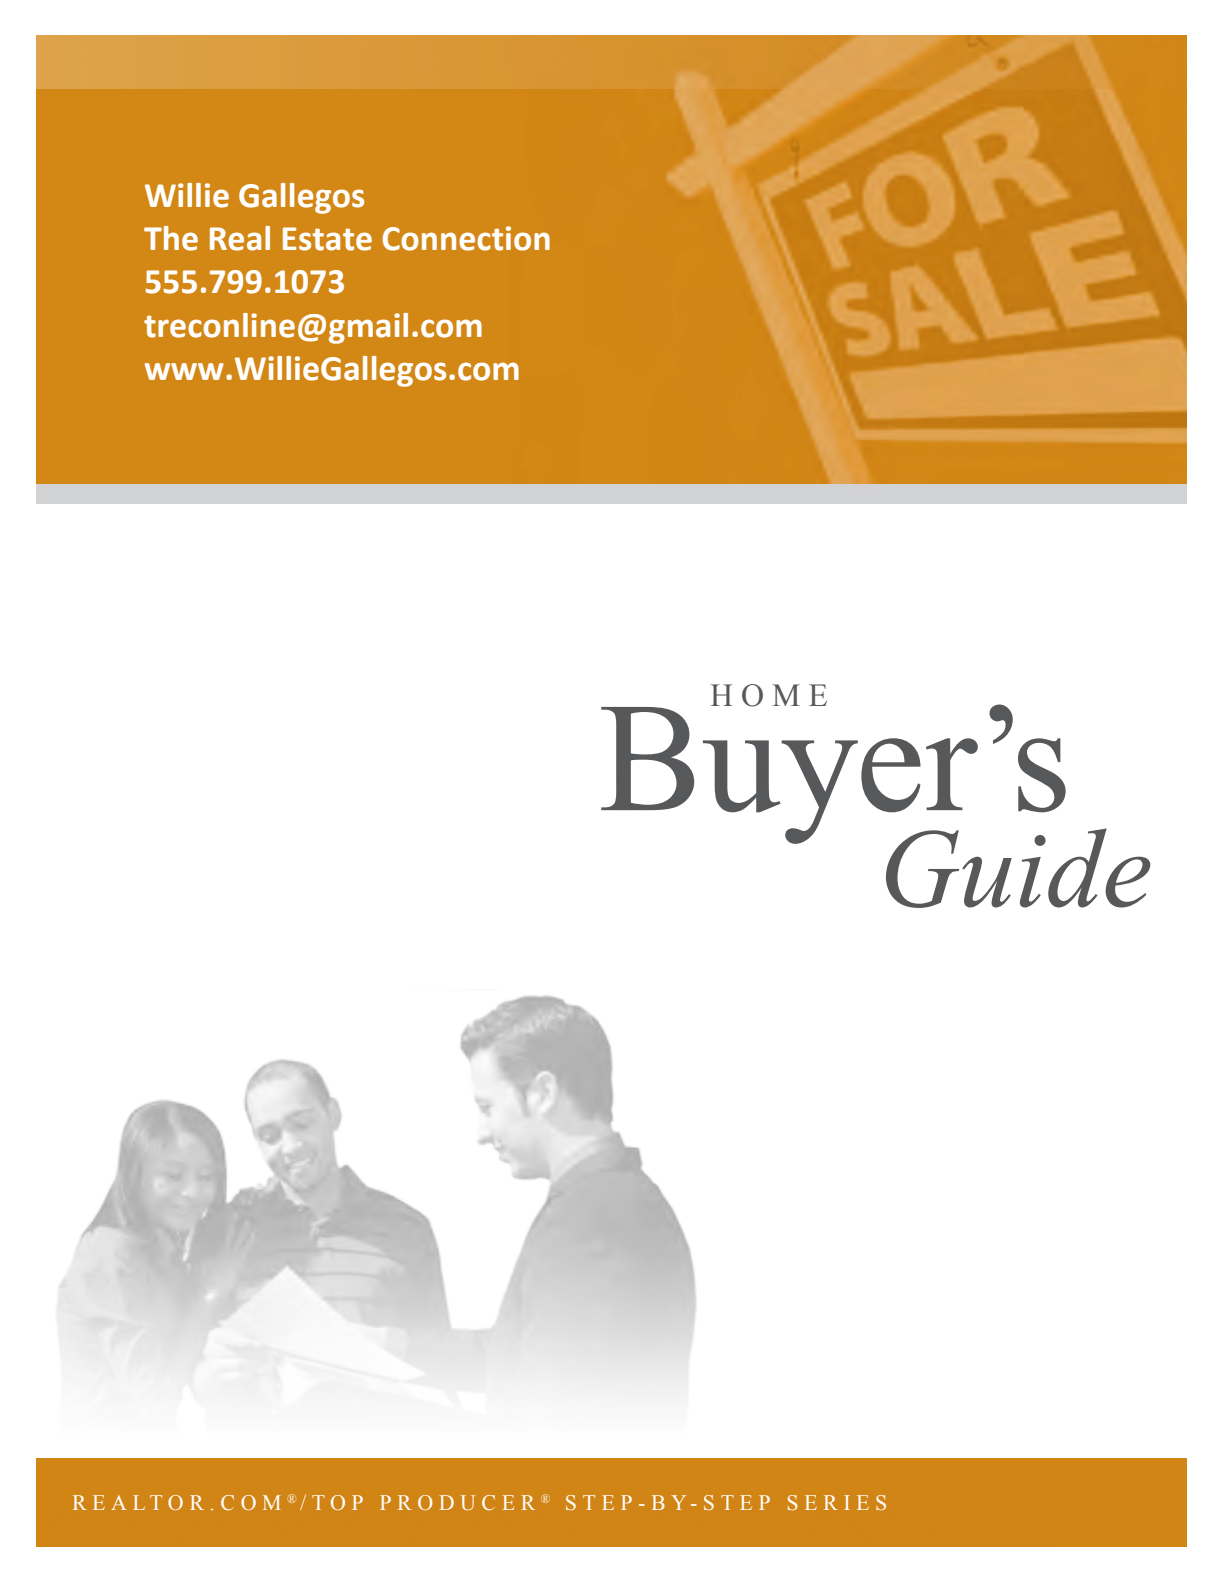 Free Home Buyers Guide Image